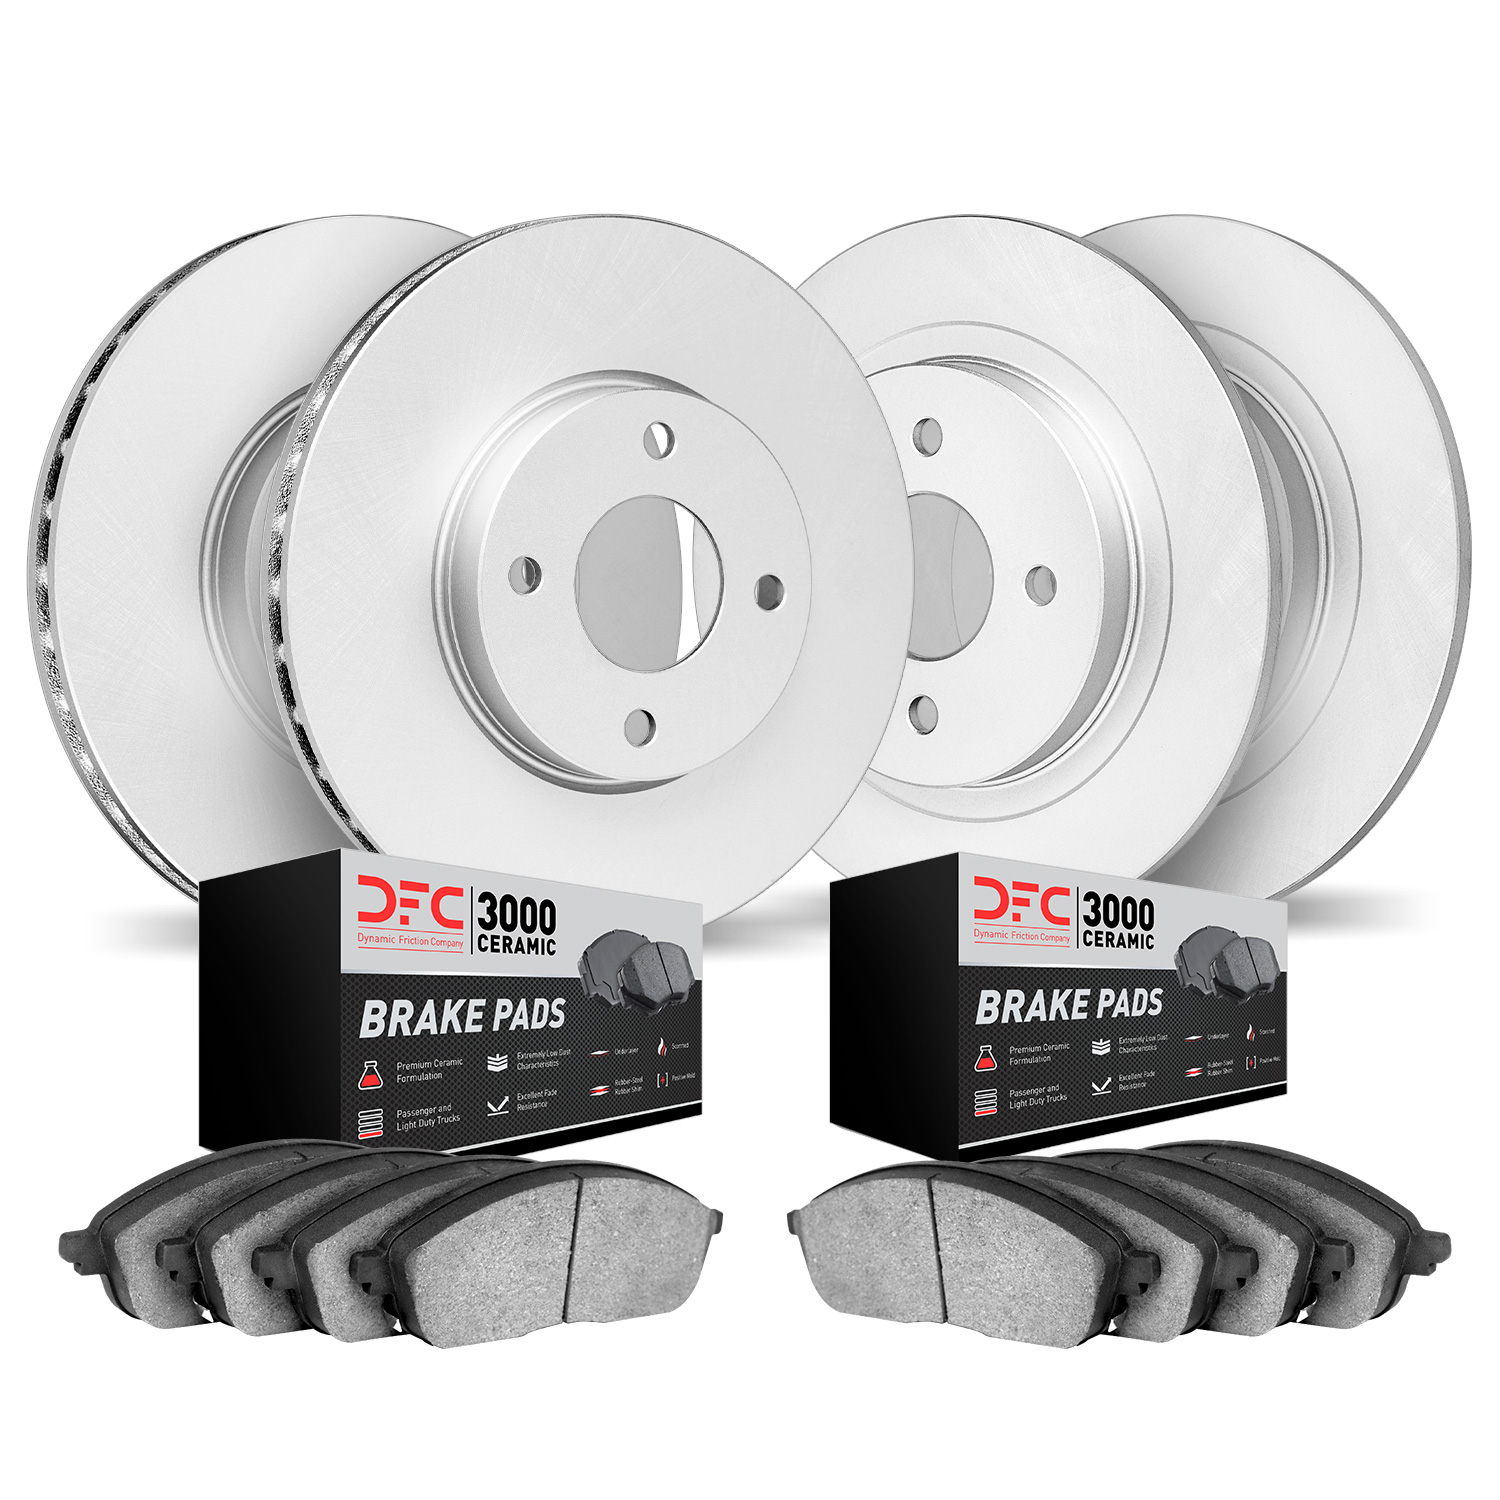 4304-59007 Geospec Brake Rotors with 3000-Series Ceramic Brake Pads Kit, 1998-1999 Acura/Honda, Position: Front and Rear